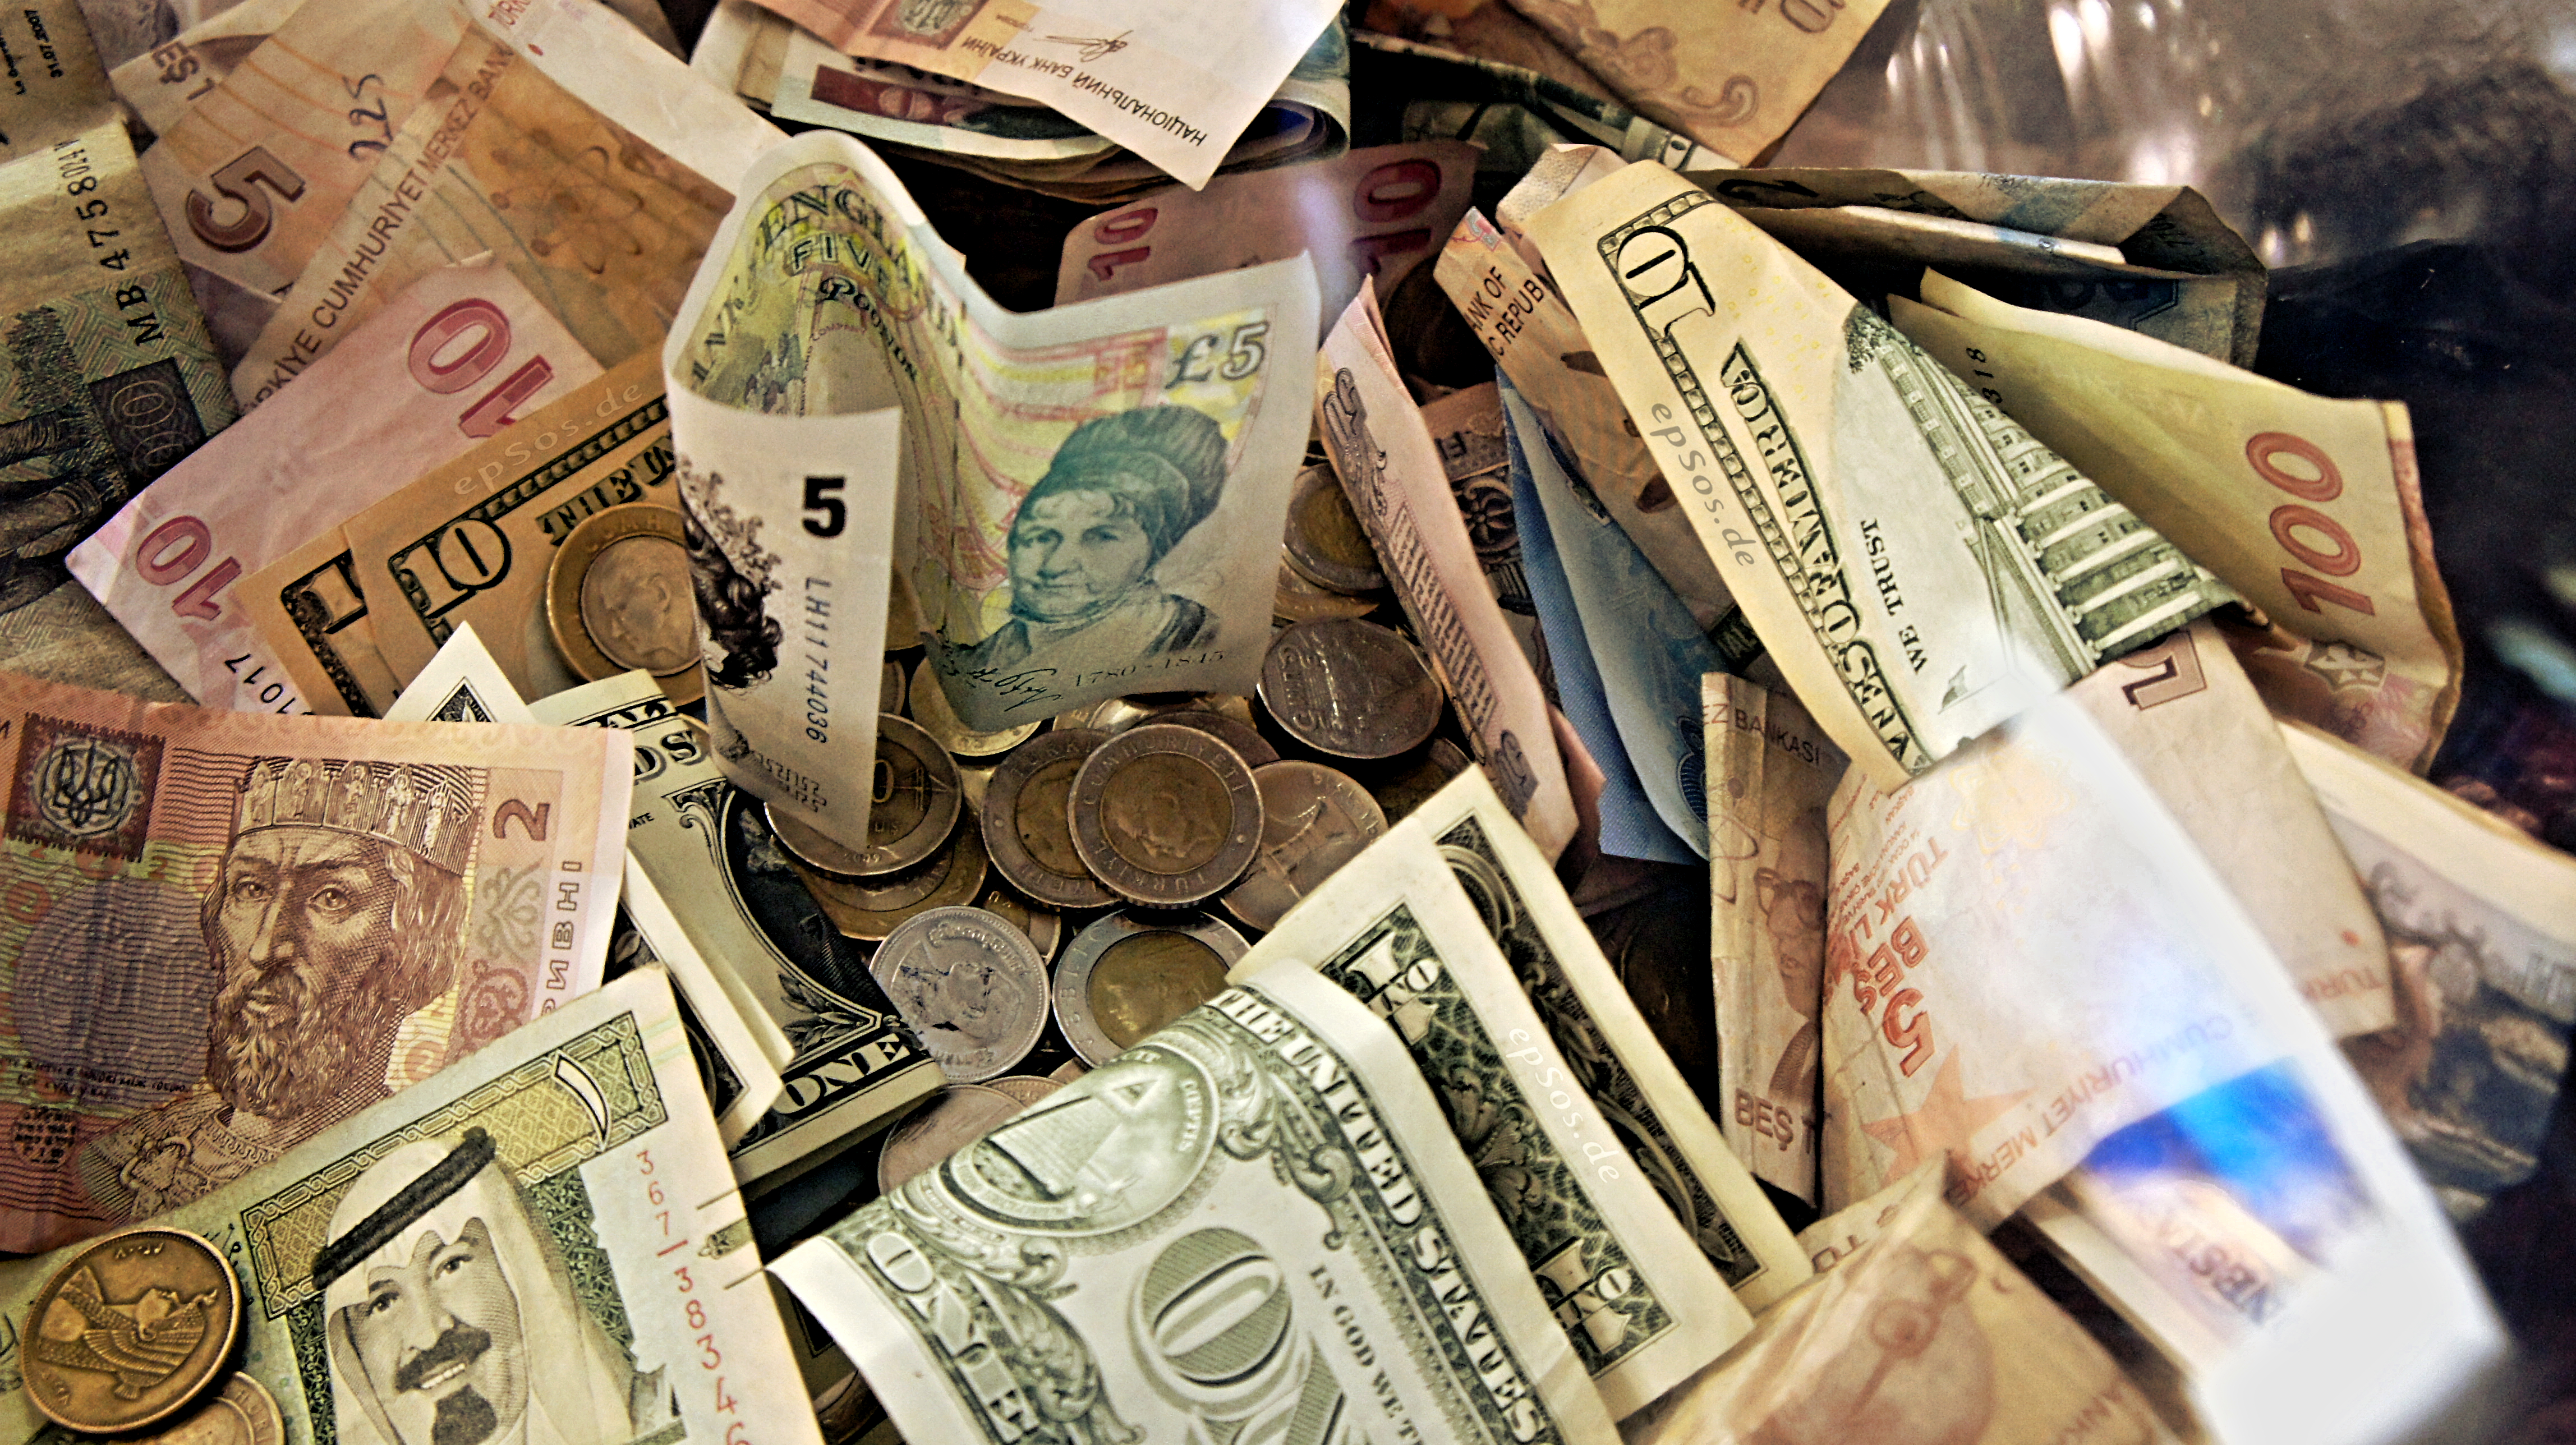 File:Forex Money for Exchange in Currency Bank.jpg - Wikimedia Commons